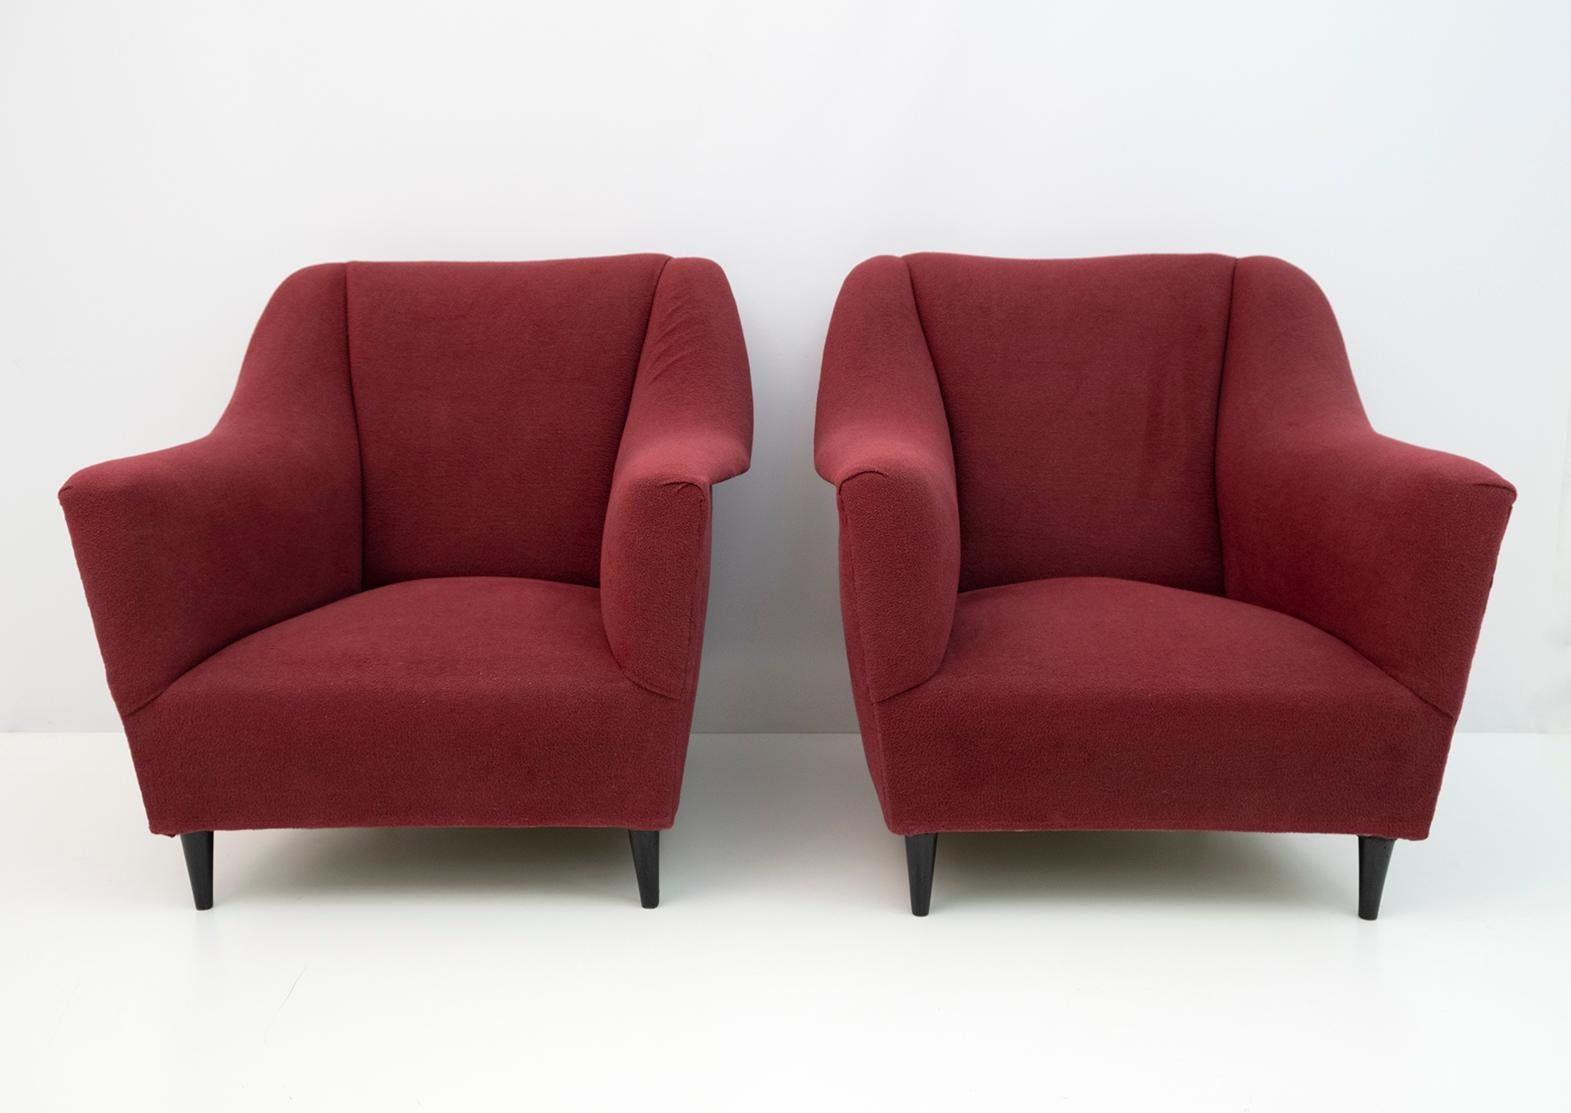 Pair of design armchairs, structure and legs in solid wood, original period chenille velvet upholstery, 1950s production,
Conditions as shown in the photos, it is advisable to redo the upholstery.

Sofa also available.